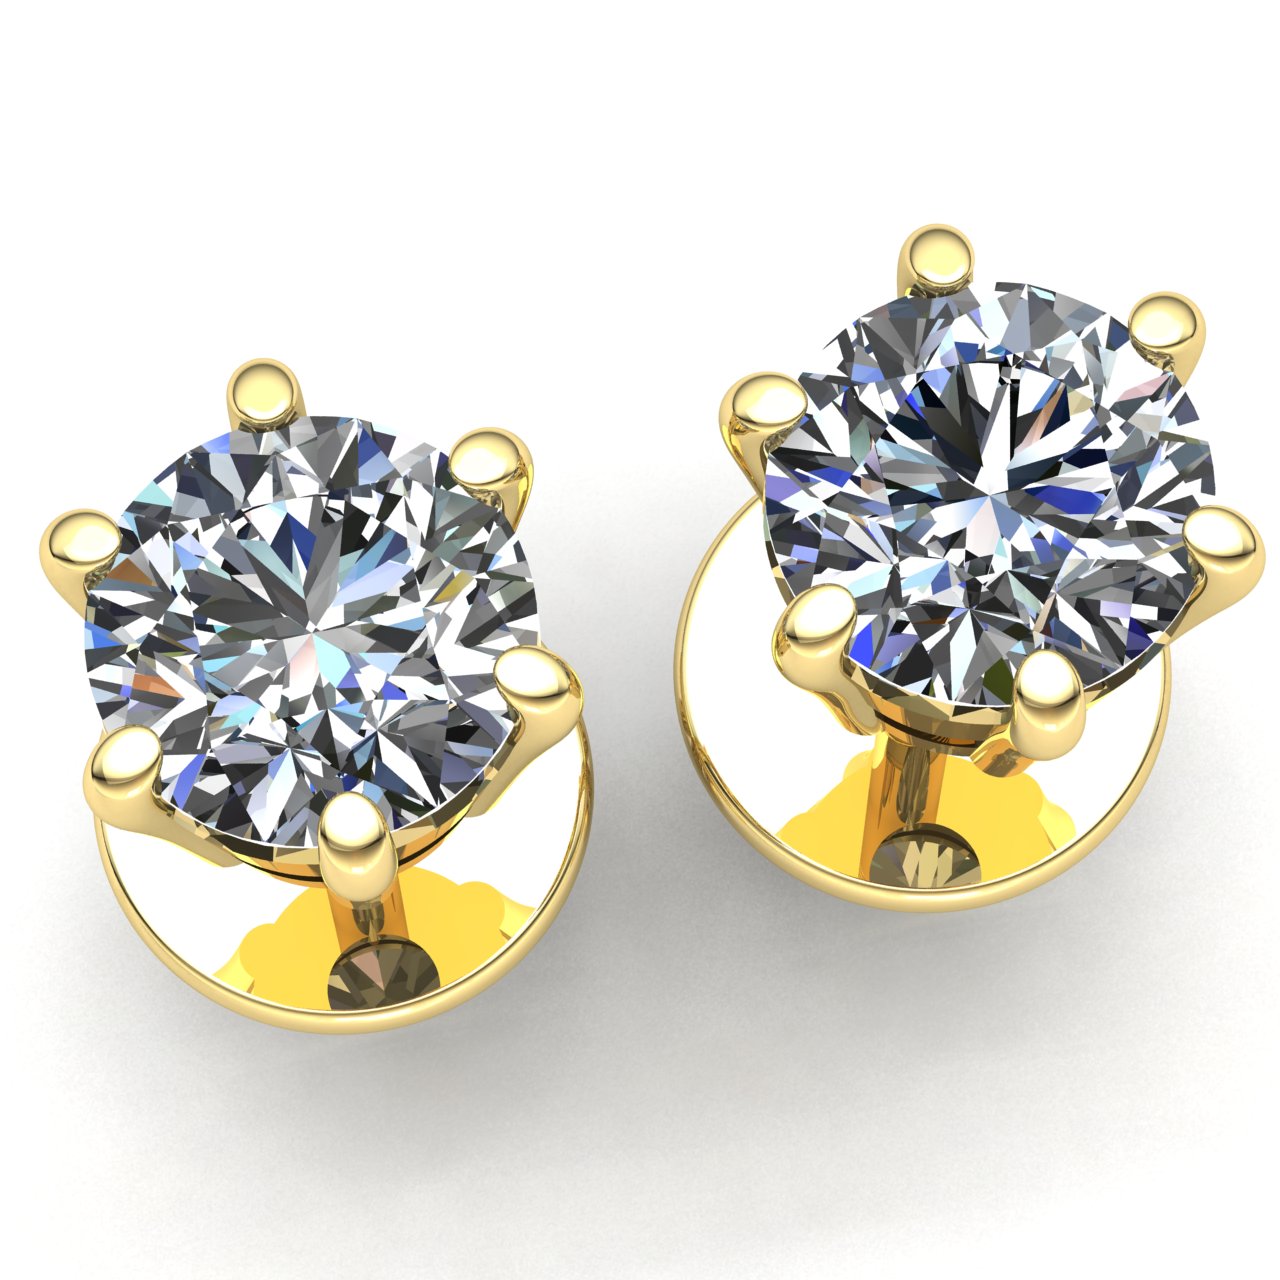 Jewel We Sell 1.25ctw Round Cut Diamond Ladies Casual Solitaire Stud Earrings Solid 18K White, Yellow, or Rose Gold G SI1